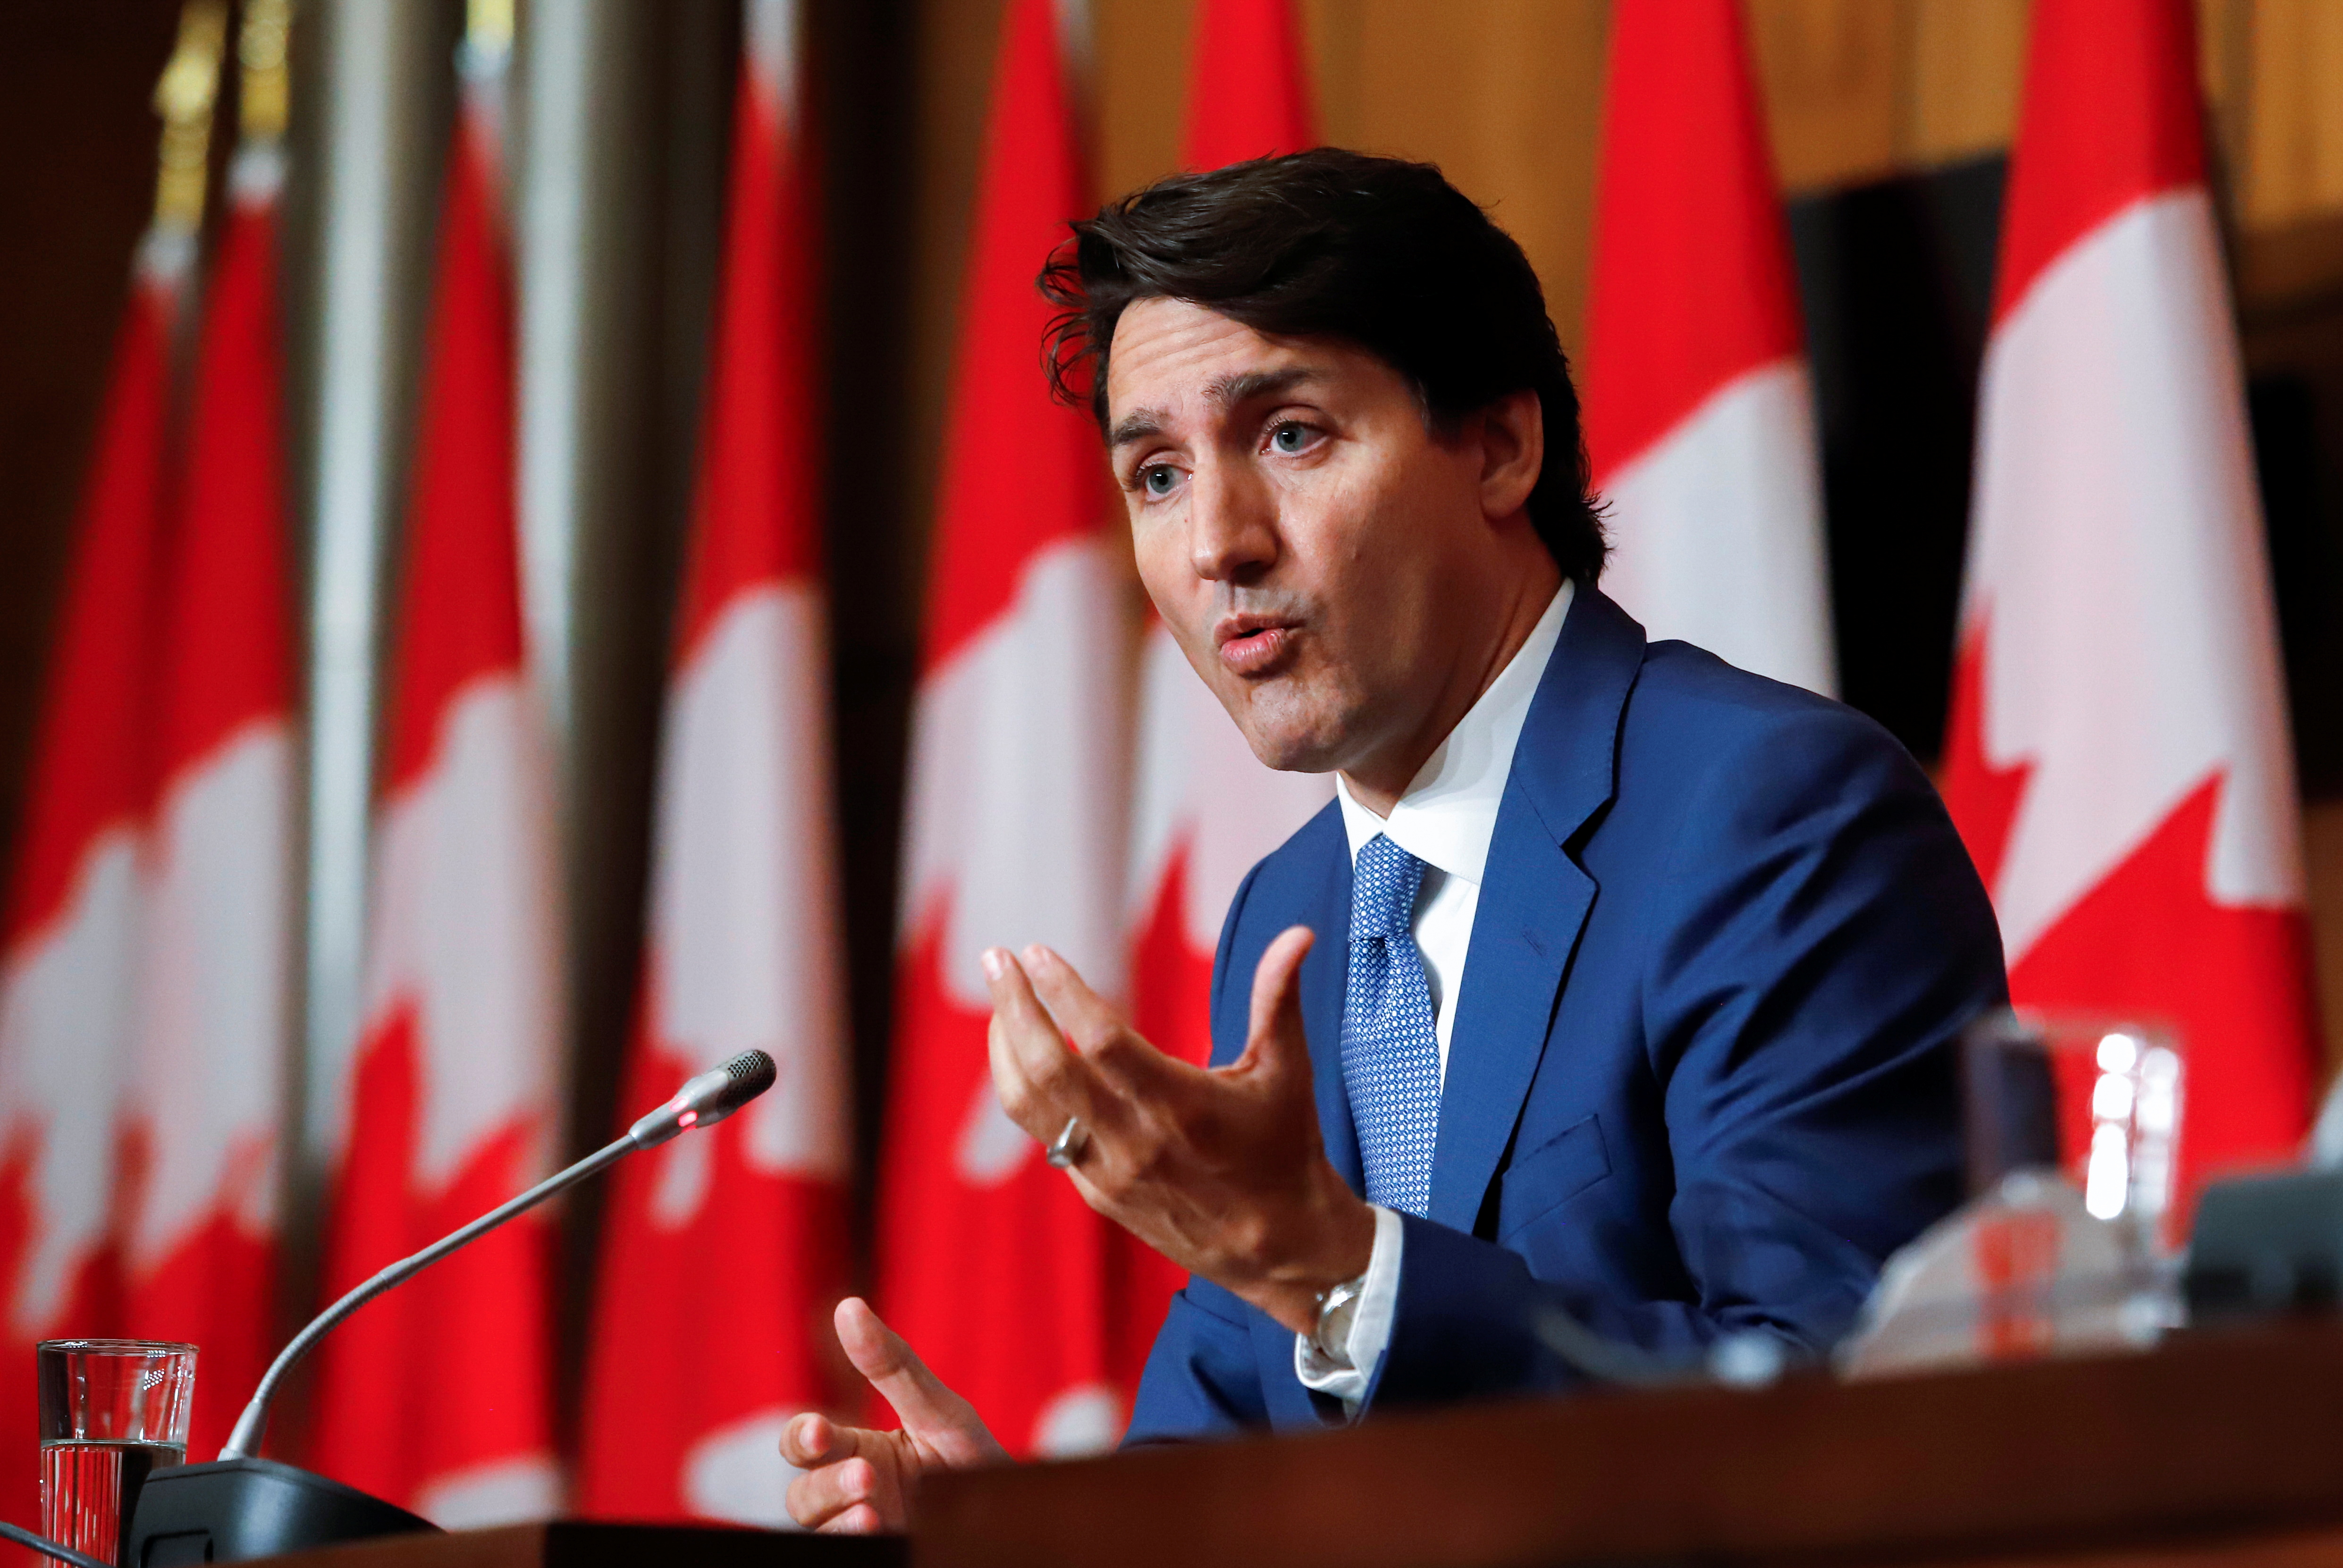 Canada's Prime Minister Justin Trudeau speaks during a news conference in Ottawa